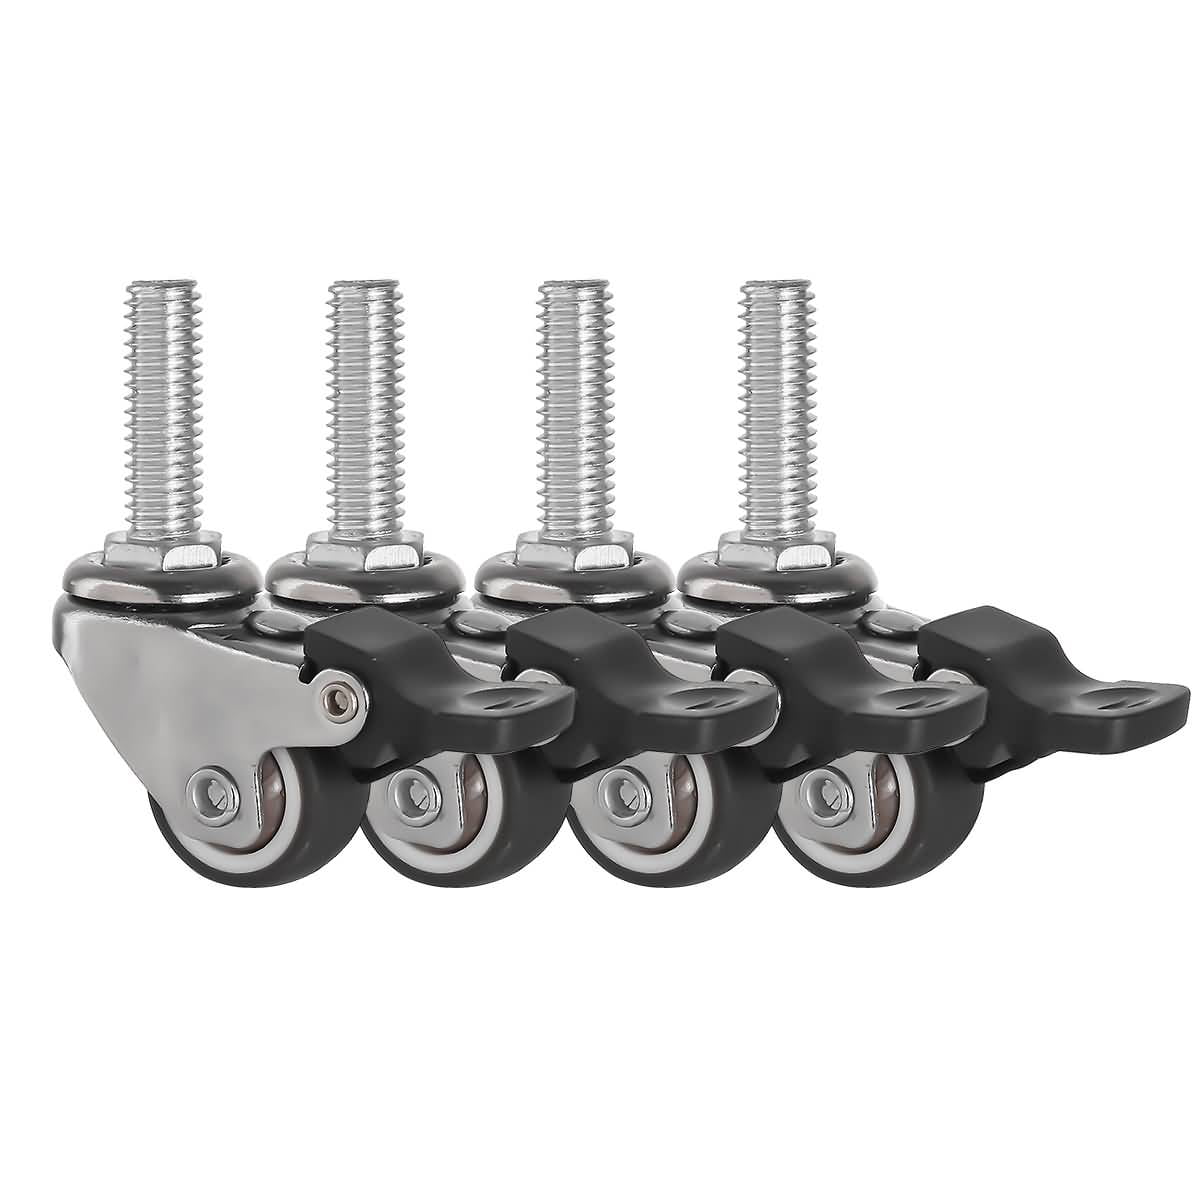 Details about   24 Pack 1 Inch Stem Caster Wheel Swivel with Brake Grey Rubber Caster Wheels 